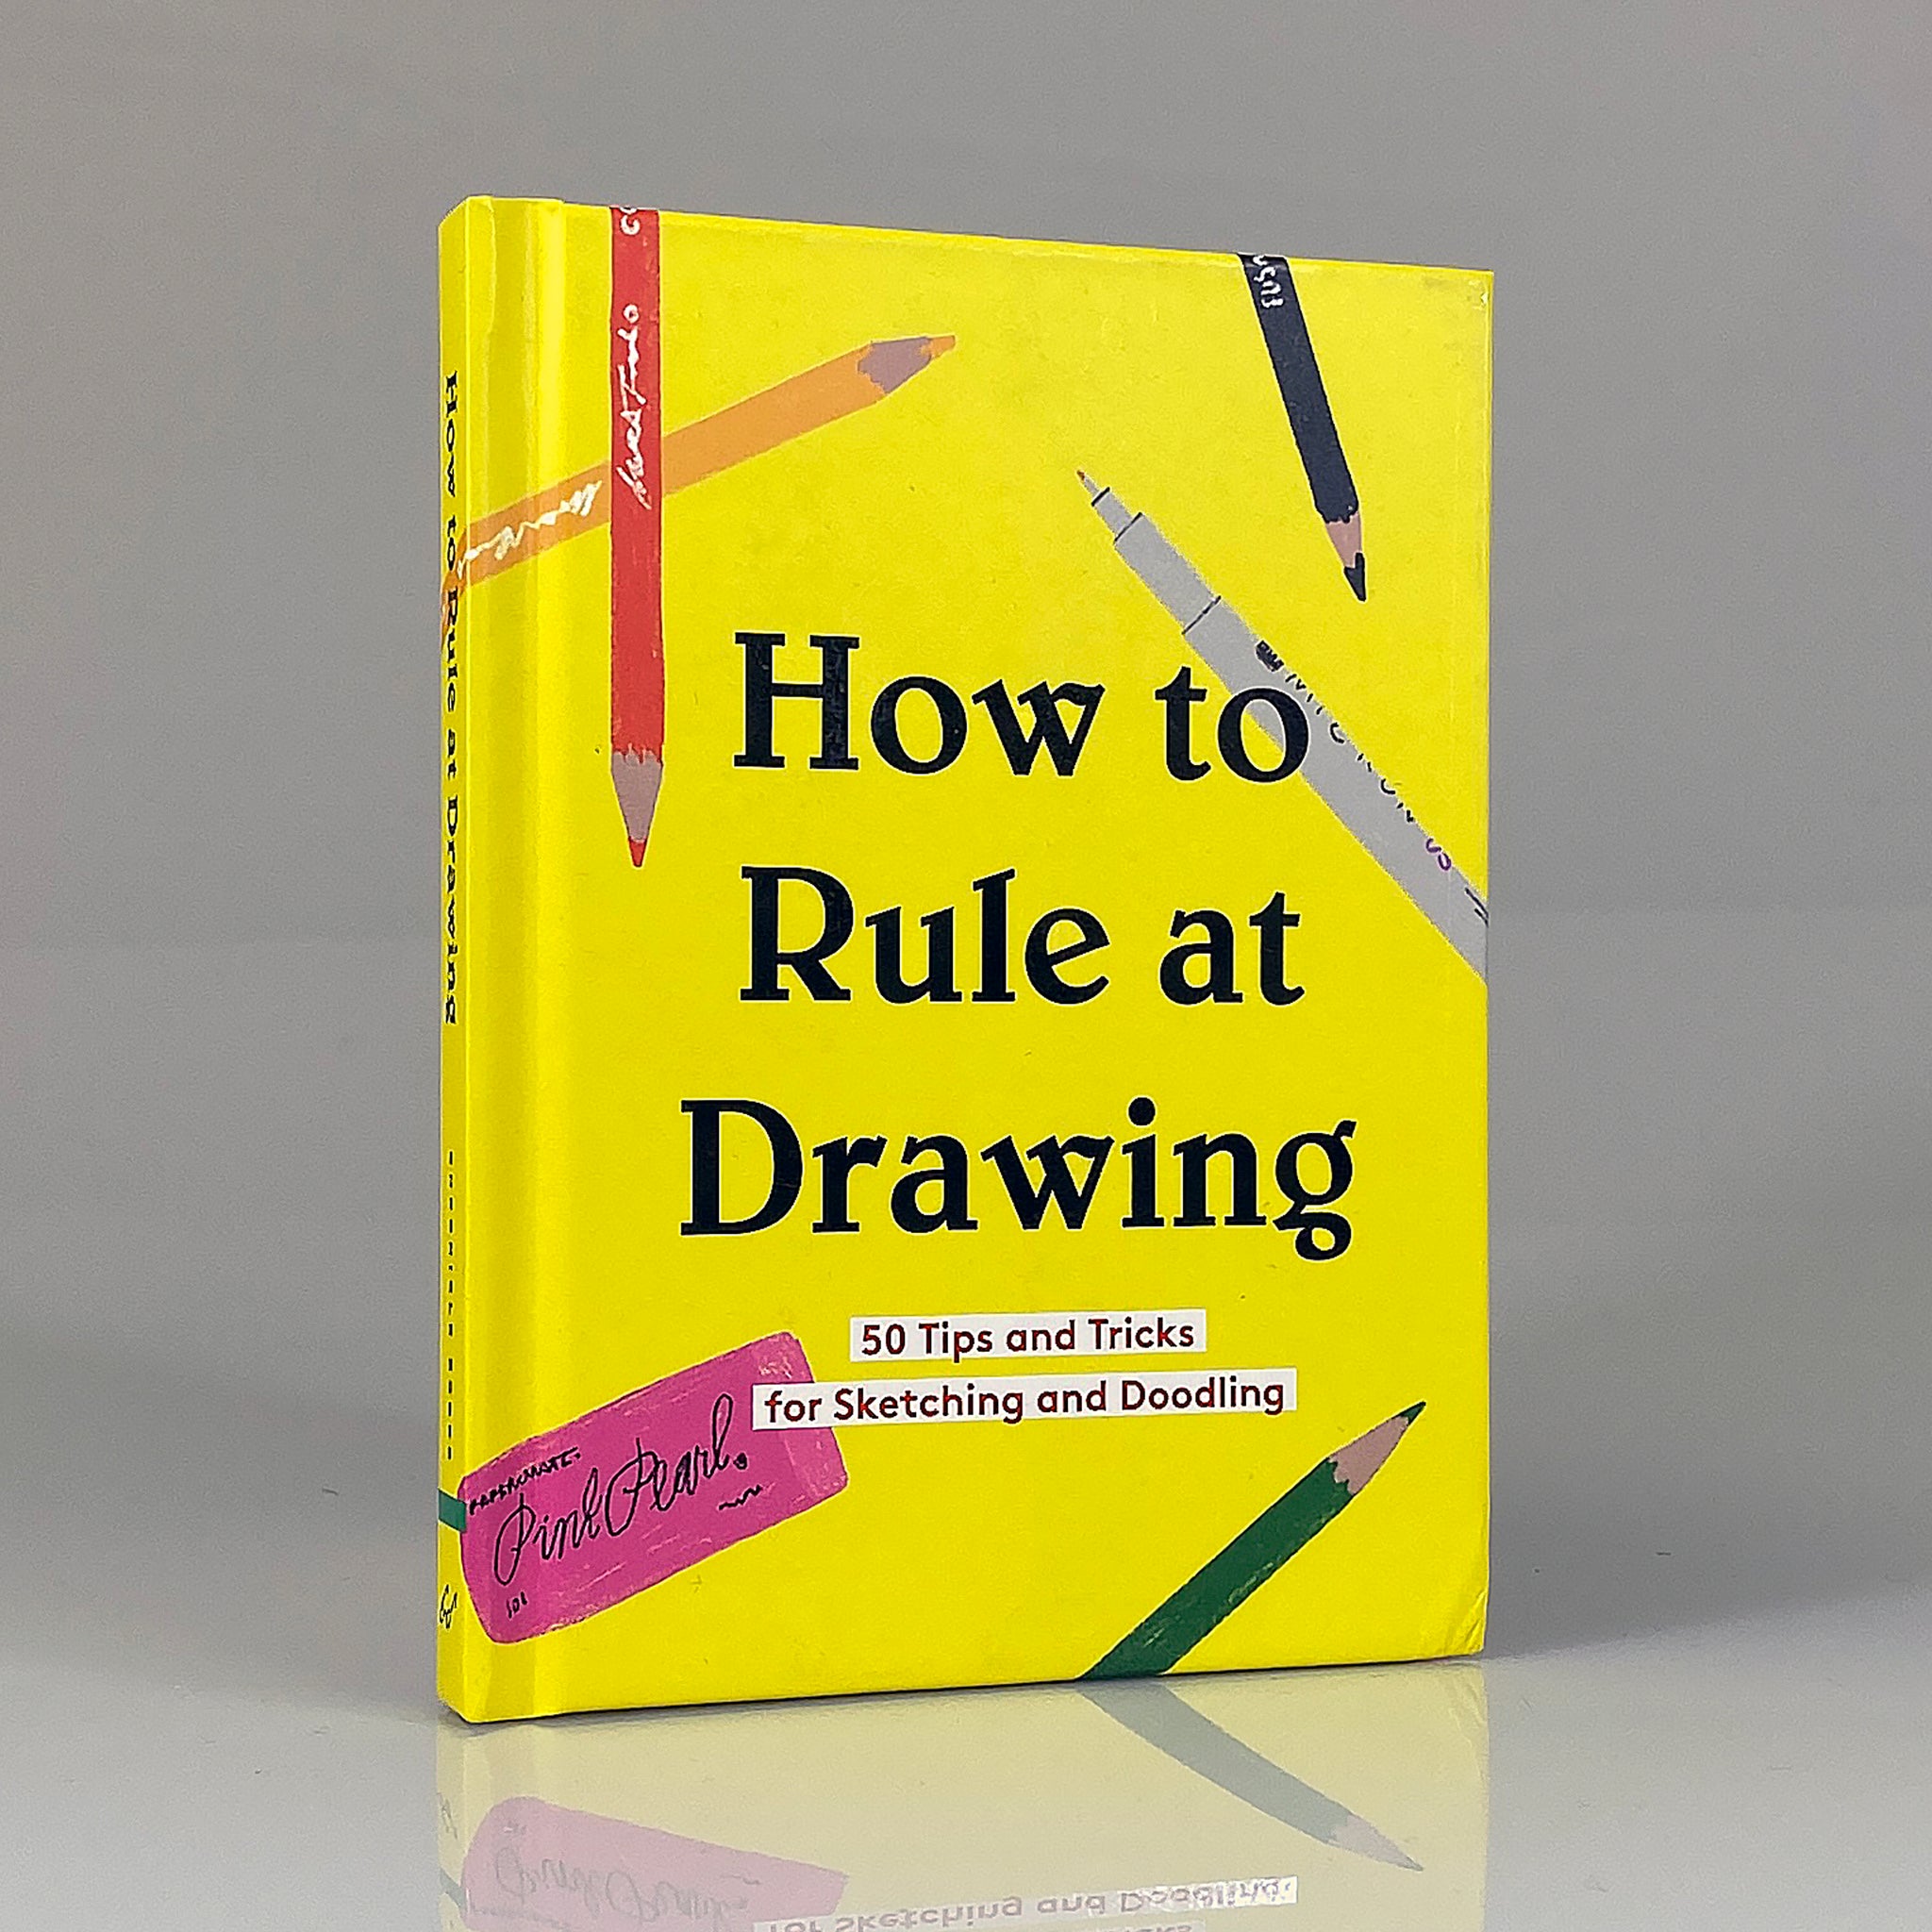 How to Rule at Drawing: 50 Tips and Tricks for Sketching and Doodling